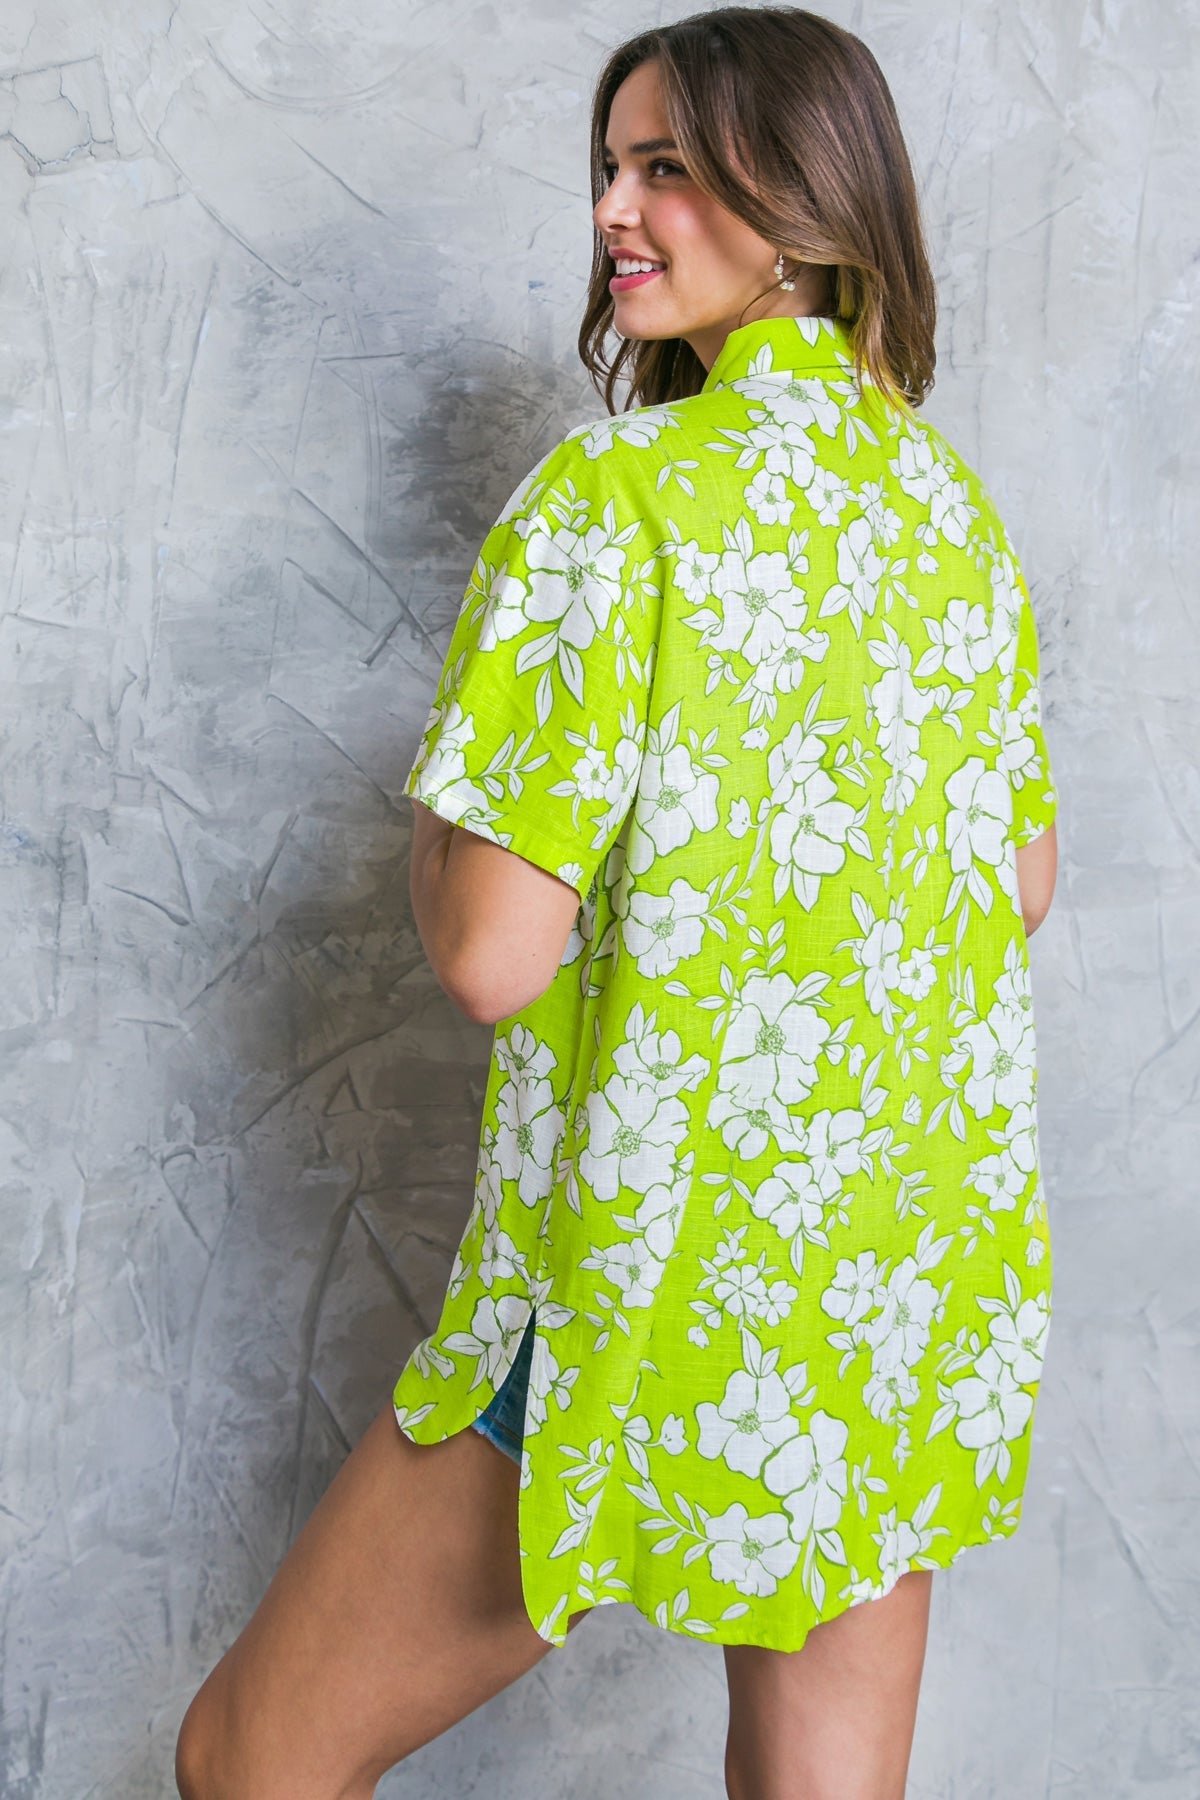 BEACHSIDE PARTY LIME WOVEN TOP - Mack & Harvie